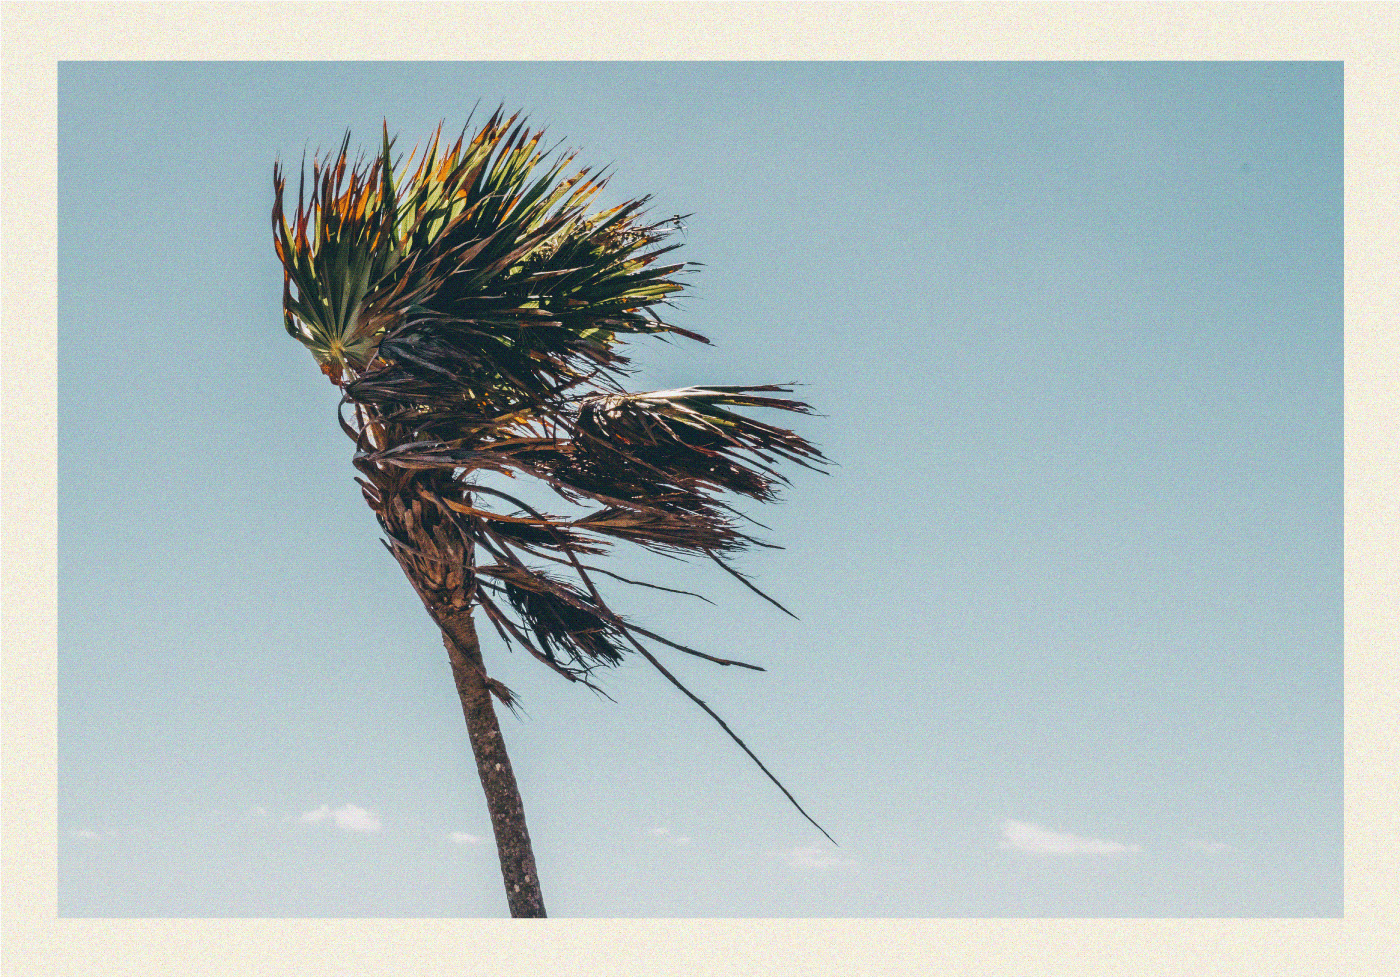 Image may contain: palm tree, sky and plant